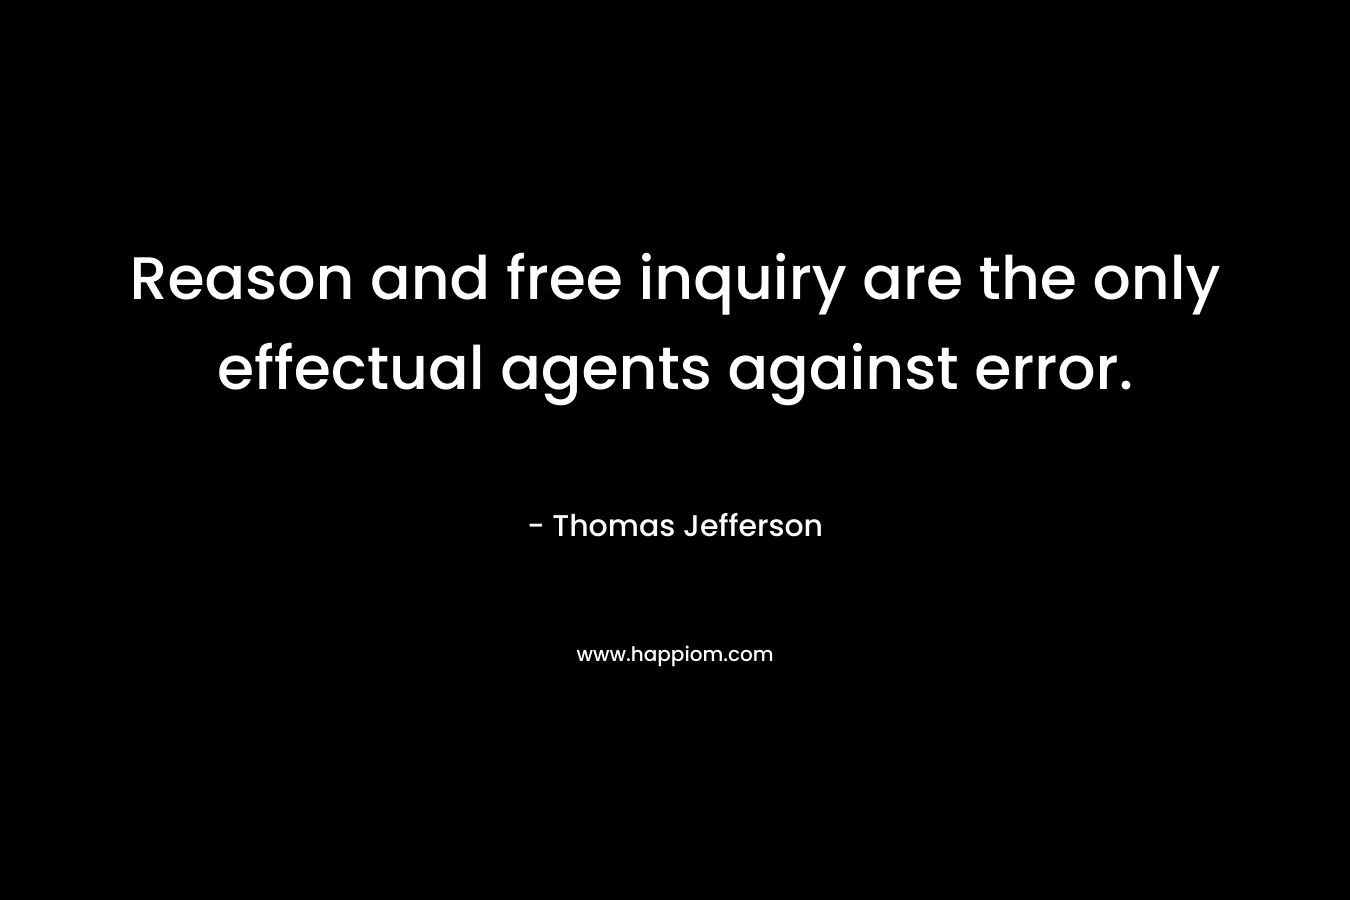 Reason and free inquiry are the only effectual agents against error.